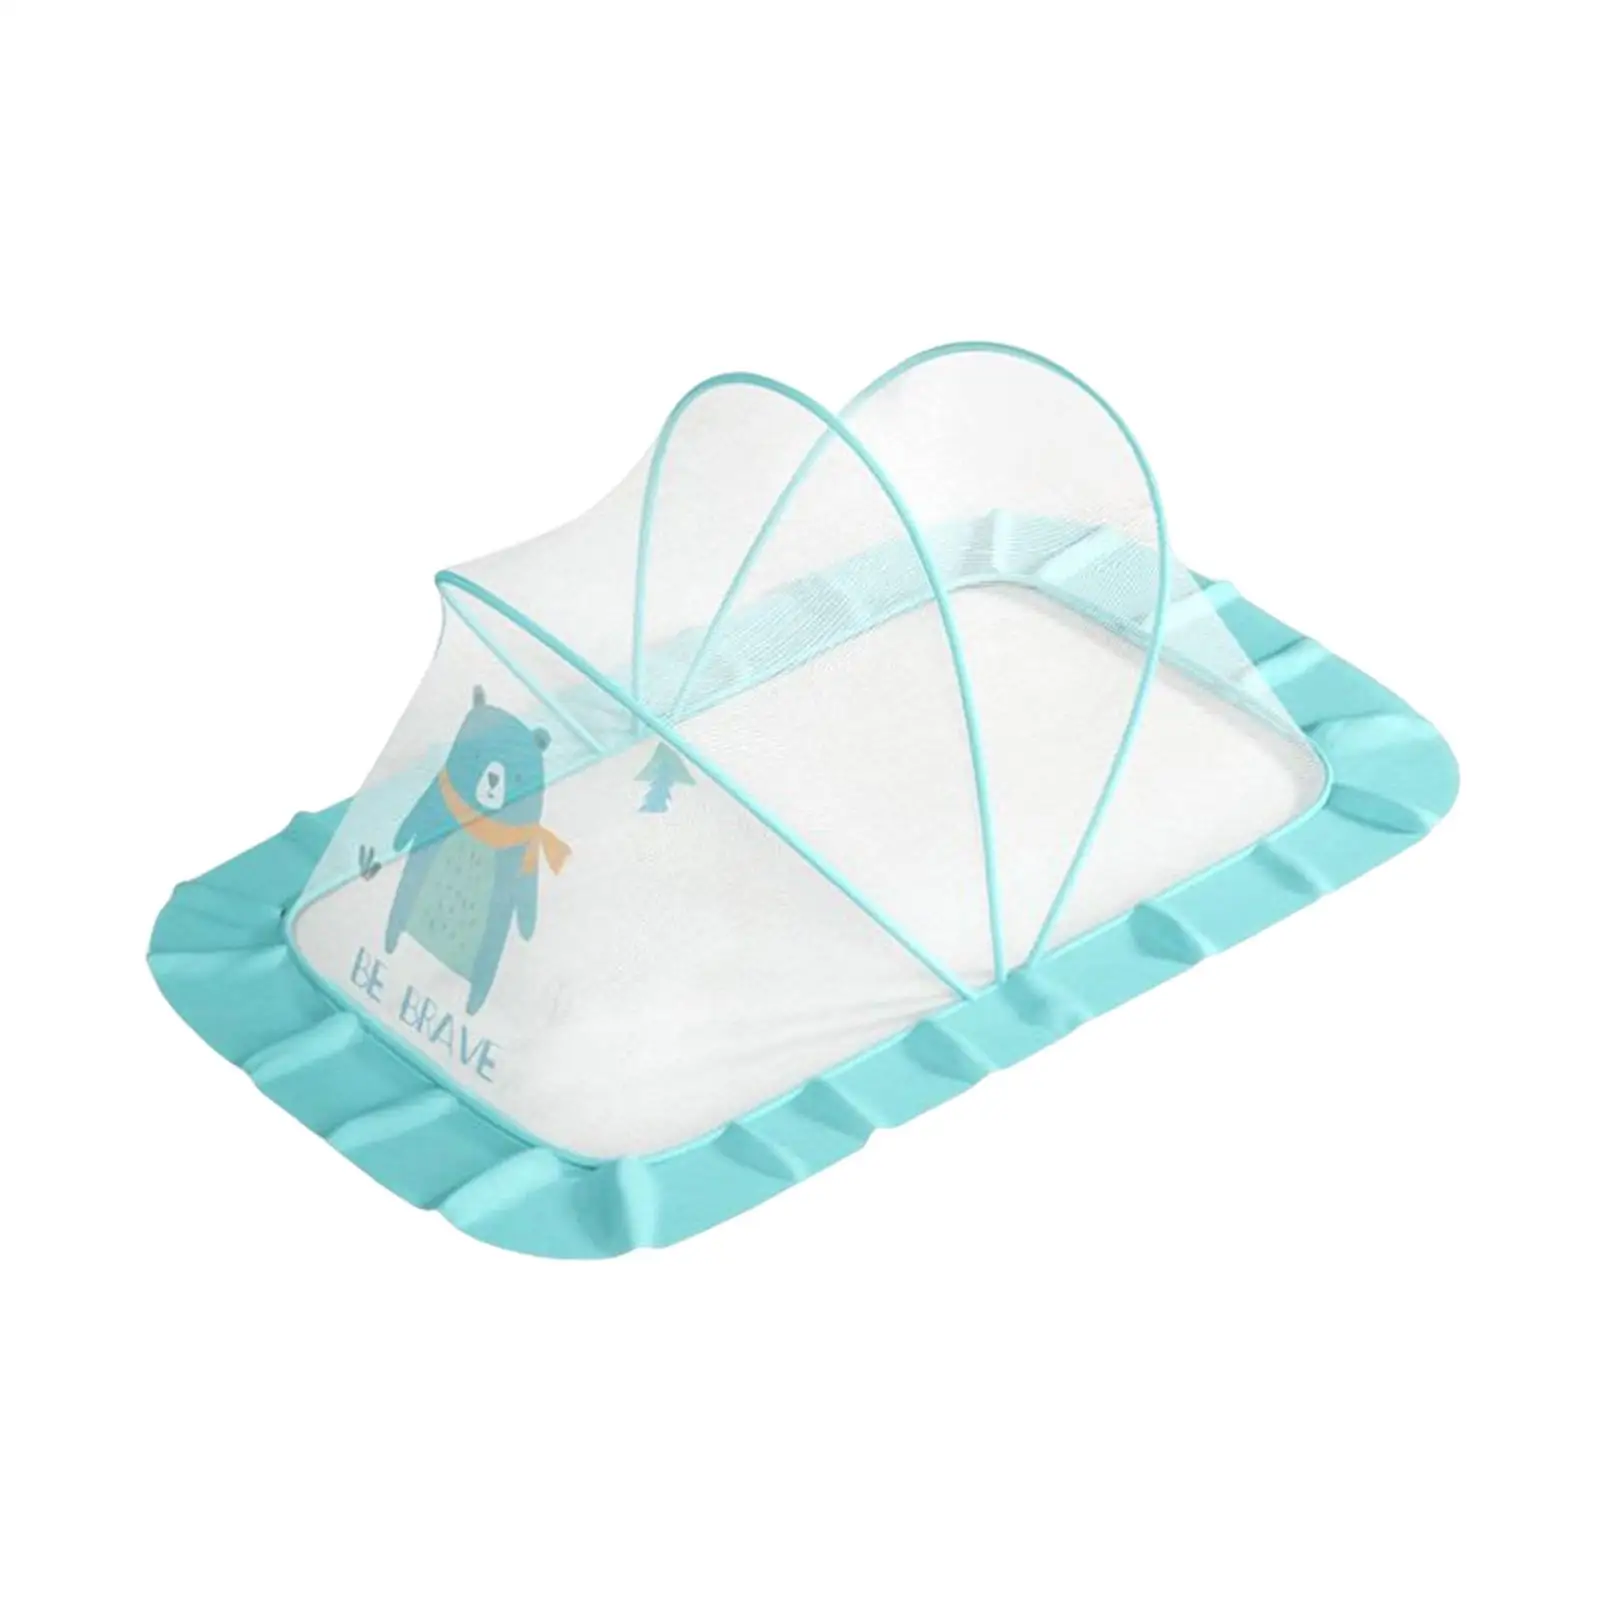 Portable Net Tent ,Lightweight , High Density Grids Bed Cover Bottomless Foldable for Toddlers